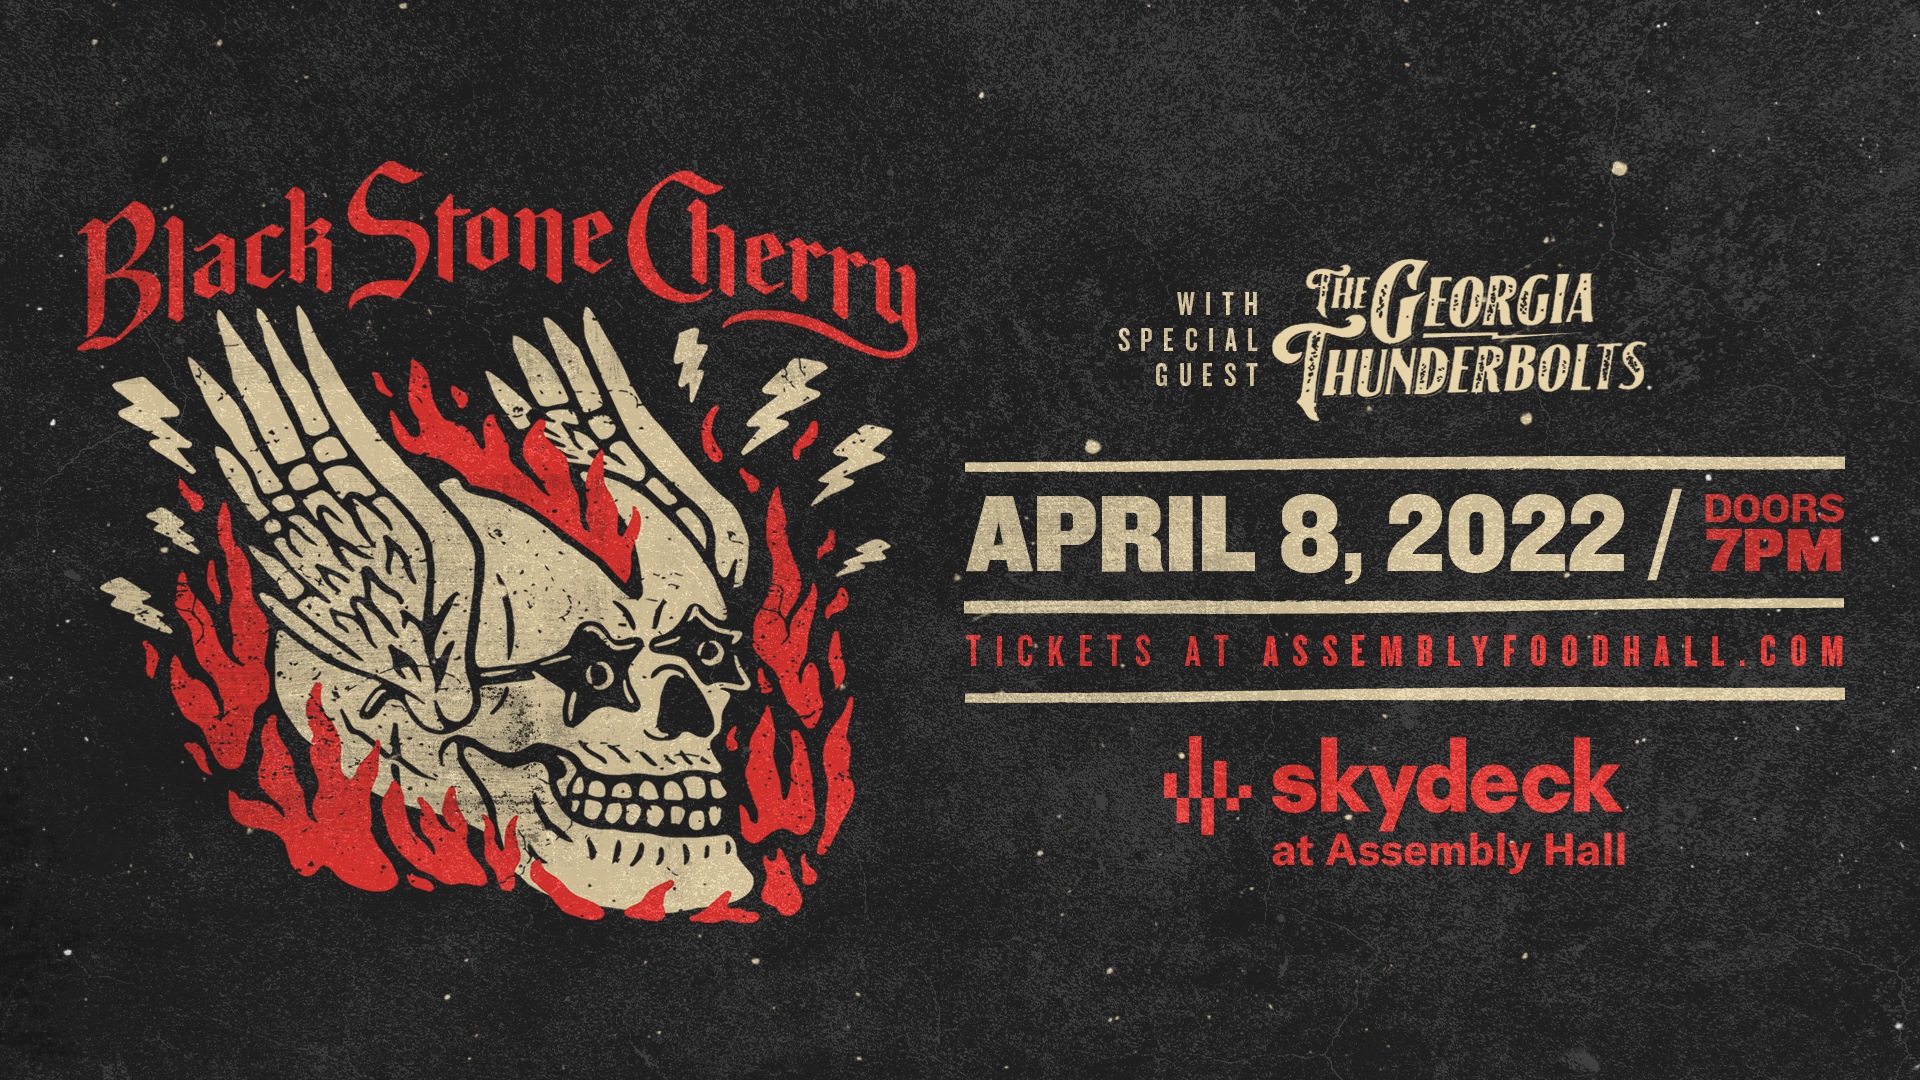 Promo image of 102.9 The Buzz presents Black Stone Cherry at Skydeck